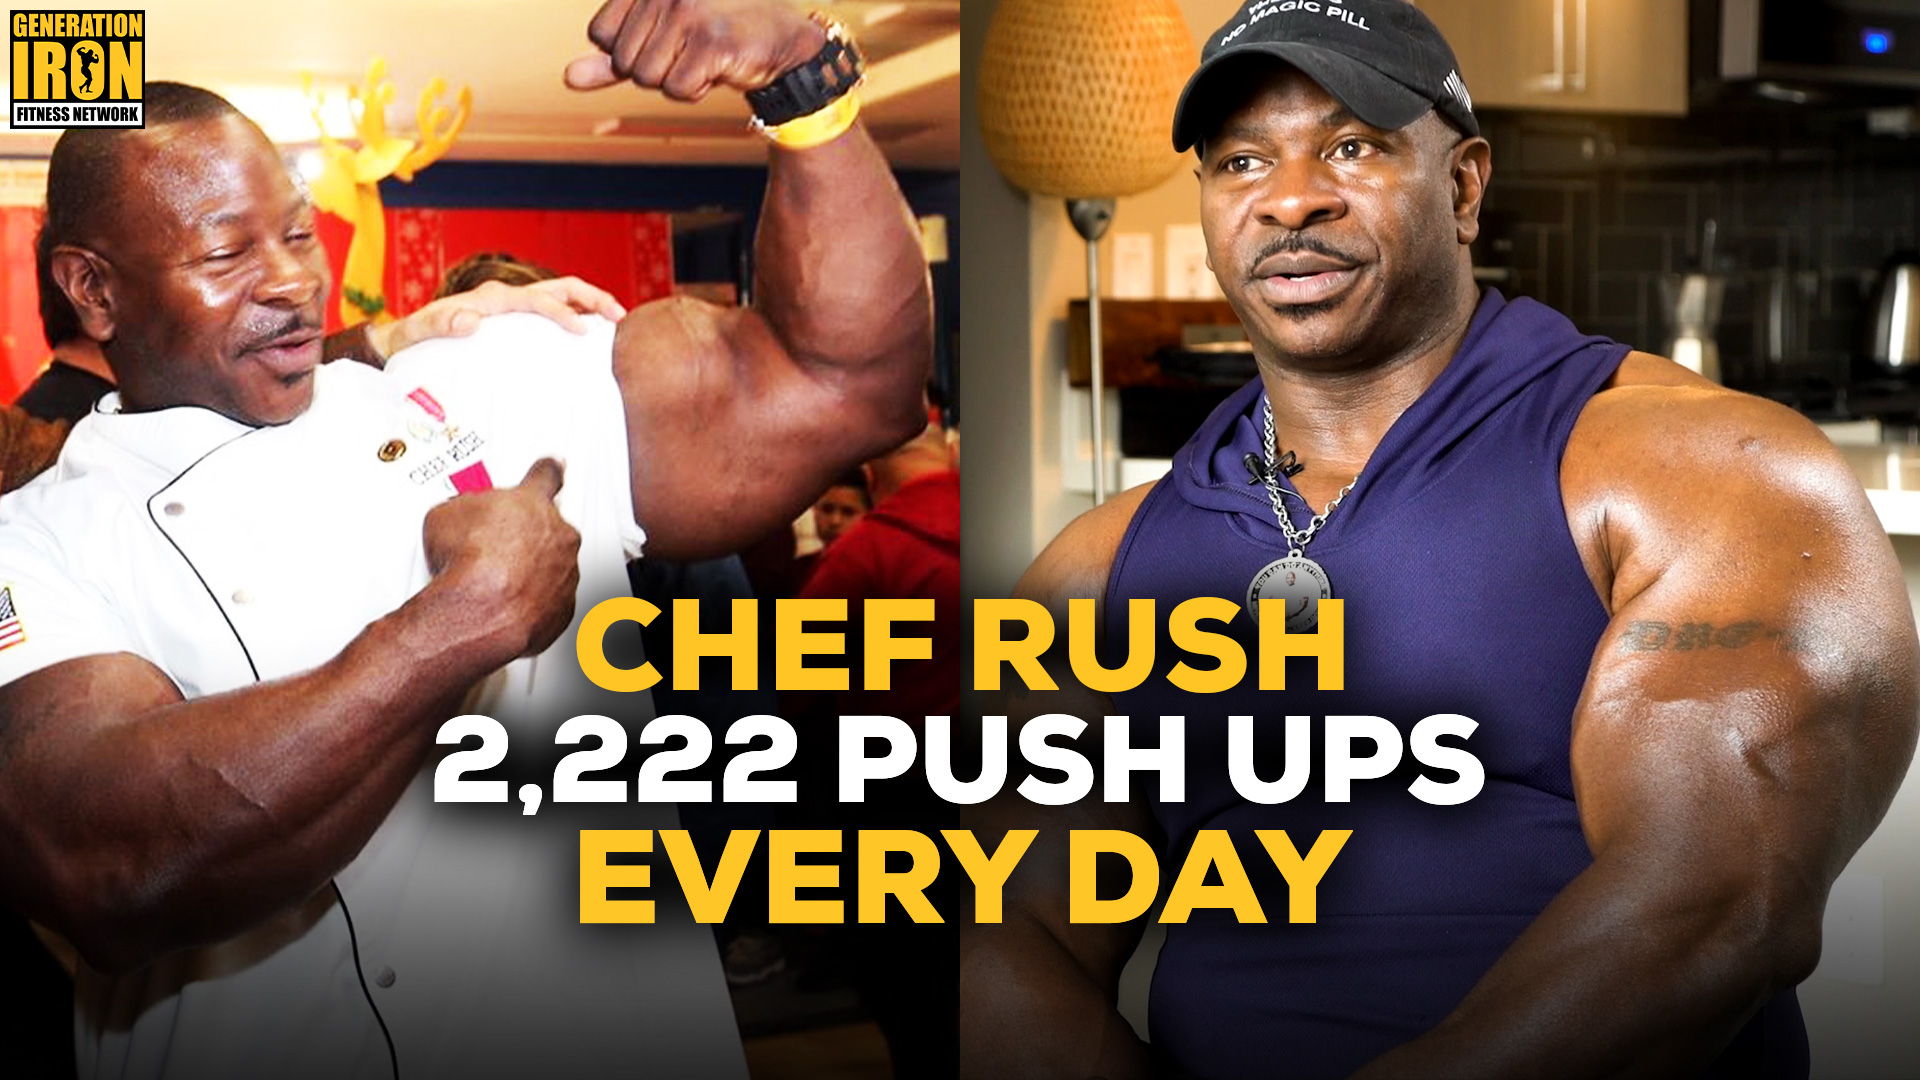 Interview: The Reason Chef Rush Does 2,222 Push Ups A Day